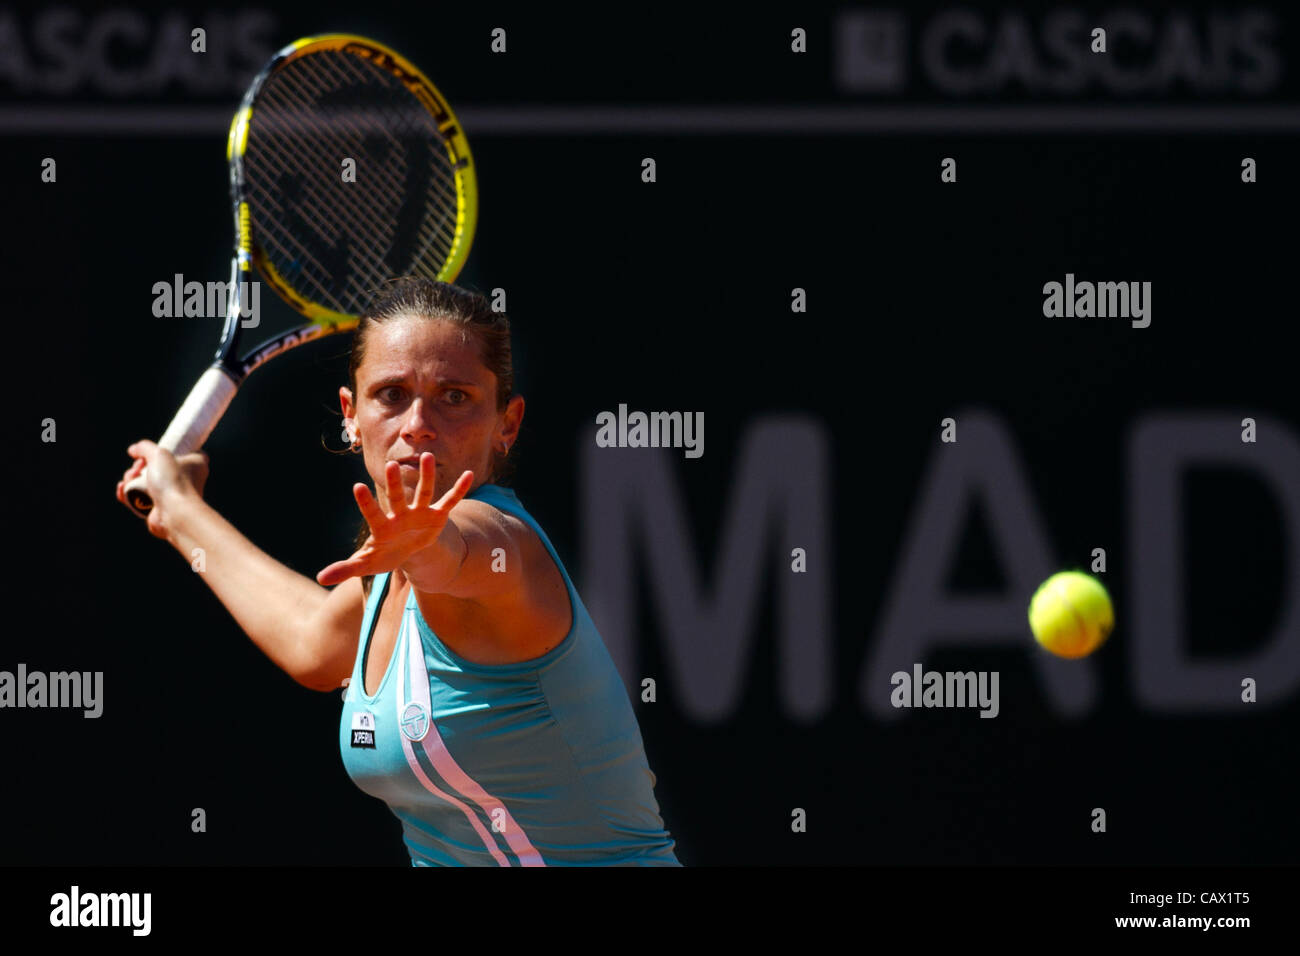 30.04.2012 Lisbon, Portugal. Roberta Vinci (ITA) (pictured) defeated Nina Bratchikova (RUS) by 6-1, 1-6 and 6-4 of the first round of the Estoril open. Stock Photo